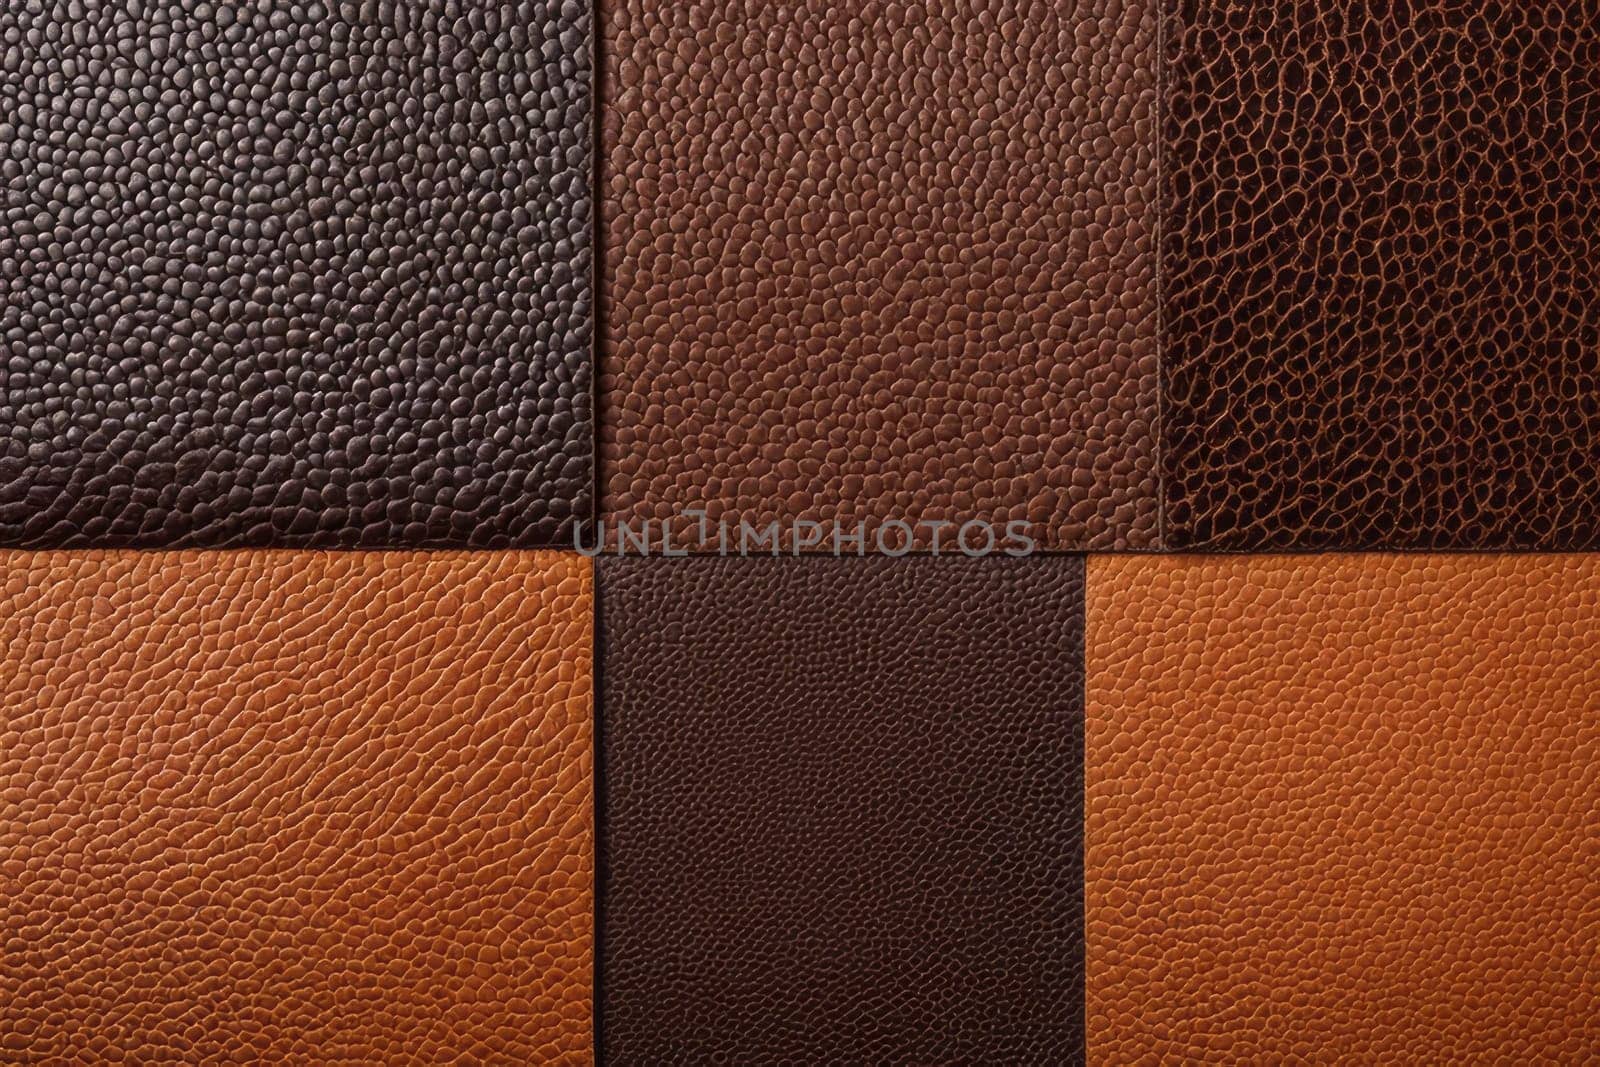 Detailed focus on the rich textures and patterns of brown leather samples